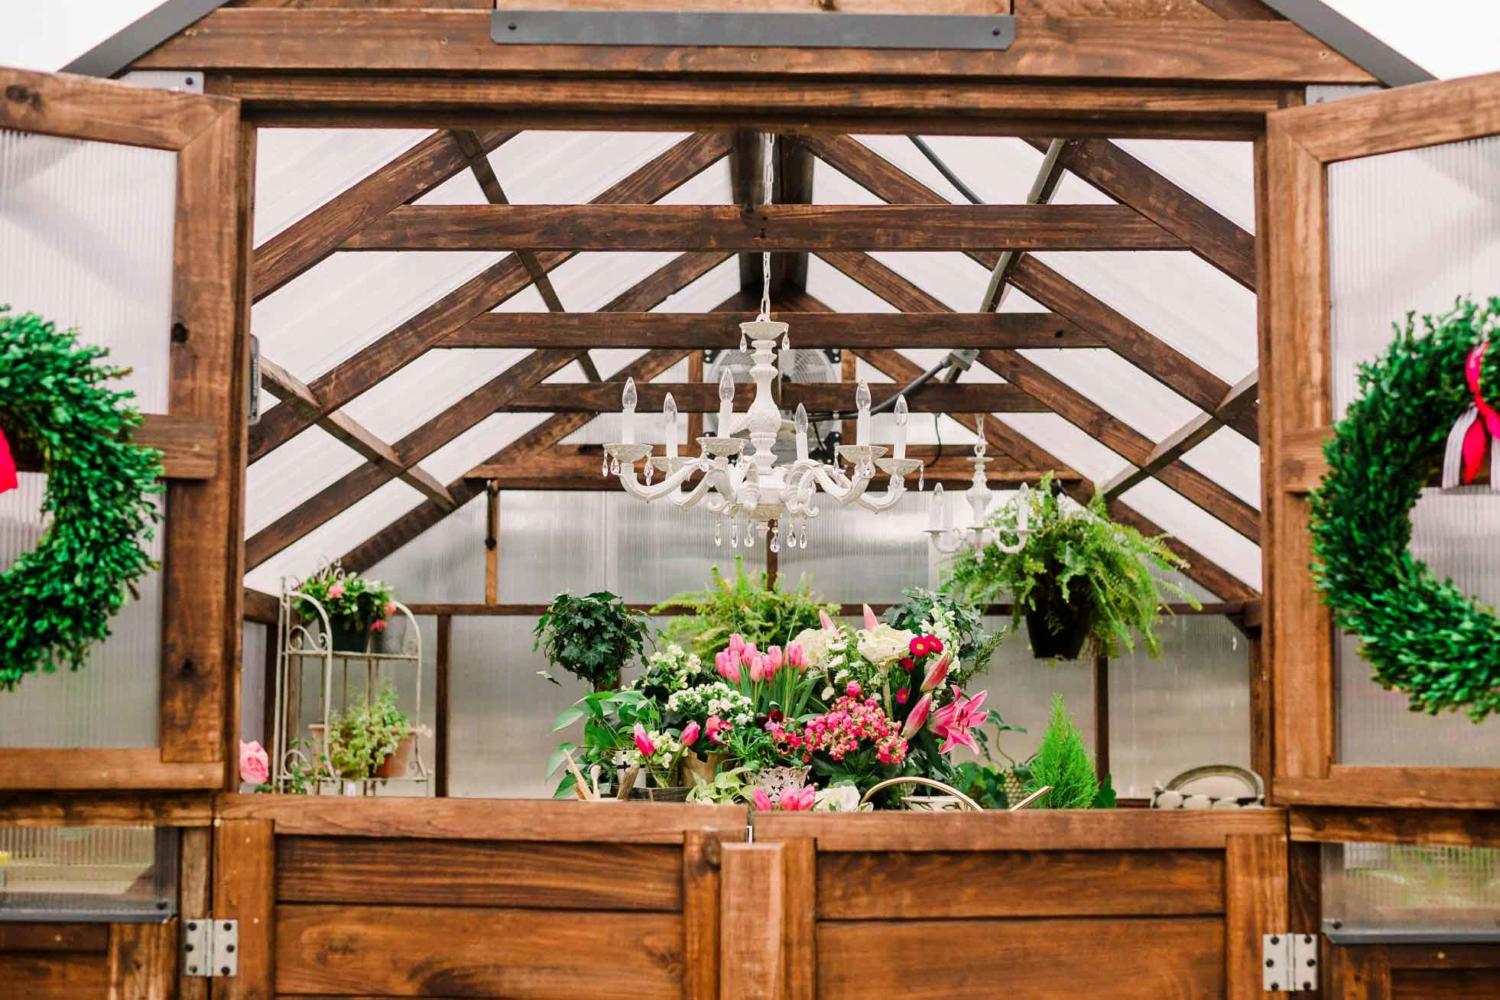 Close up of the interior of a Yoderbilt Greenhouse with brown stain. The bottom double doors are close but the top are open. Inside is various plants and flowers with a chandelier hanging from the roof.